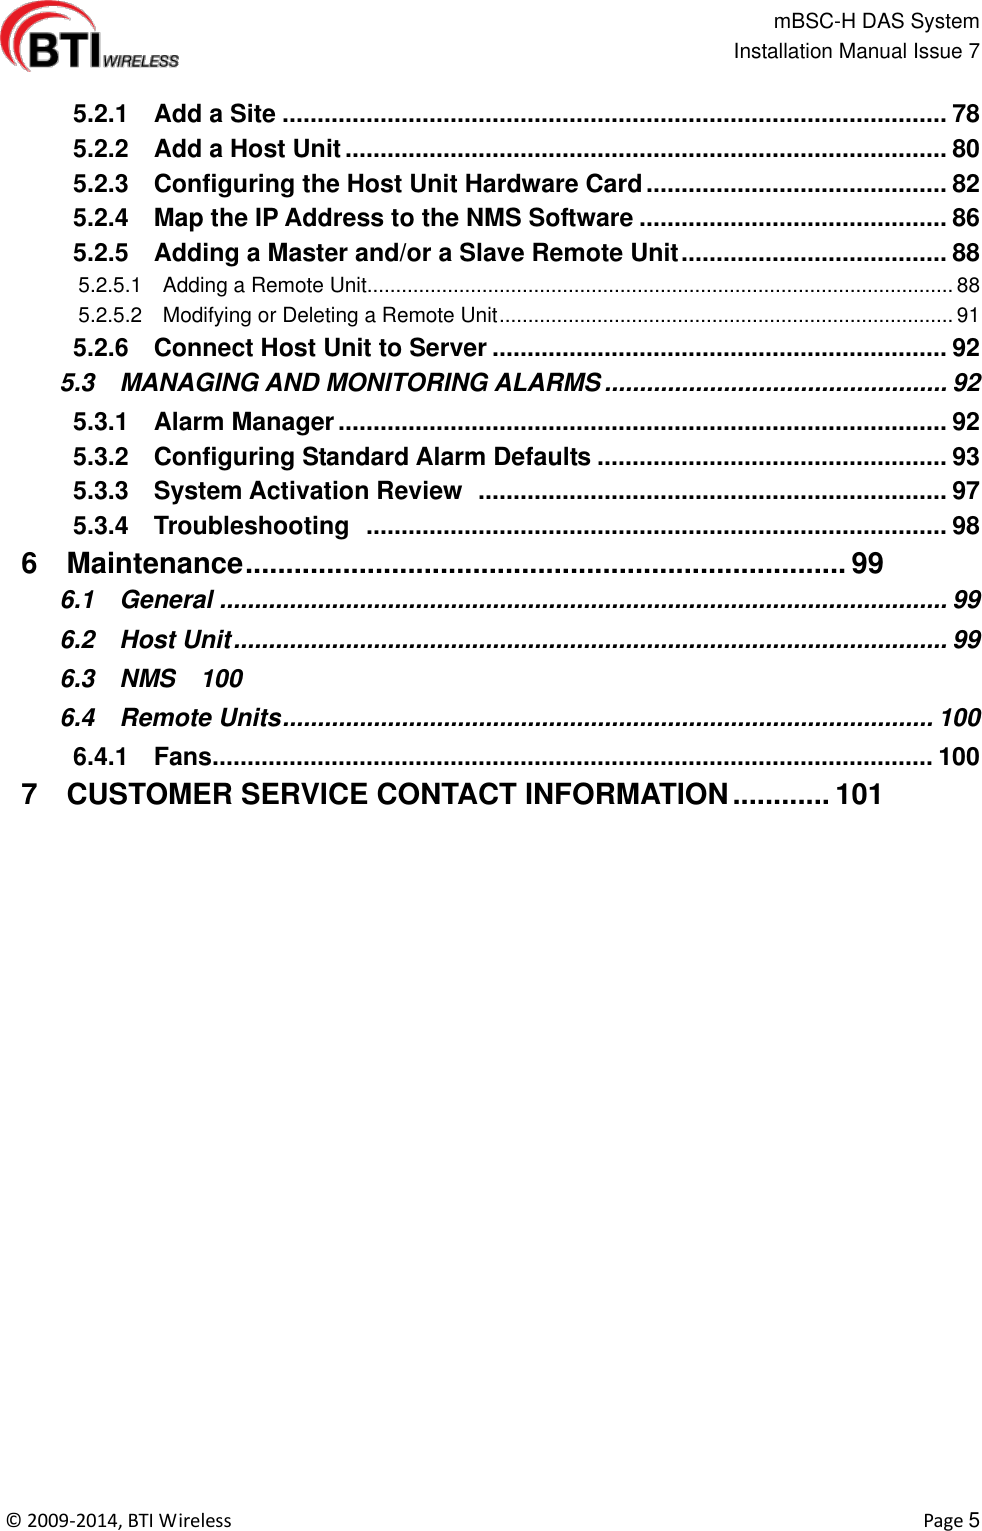                                                   mBSC-H DAS System   Installation Manual Issue 7  ©  2009-2014, BTI Wireless    Page 5    5.2.1    Add a Site ............................................................................................... 78   5.2.2    Add a Host Unit ...................................................................................... 80   5.2.3    Configuring the Host Unit Hardware Card ........................................... 82   5.2.4    Map the IP Address to the NMS Software ............................................ 86   5.2.5    Adding a Master and/or a Slave Remote Unit ...................................... 88   5.2.5.1    Adding a Remote Unit...................................................................................................... 88   5.2.5.2    Modifying or Deleting a Remote Unit ............................................................................... 91   5.2.6    Connect Host Unit to Server ................................................................. 92   5.3    MANAGING AND MONITORING ALARMS ................................................. 92   5.3.1    Alarm Manager ....................................................................................... 92   5.3.2    Configuring Standard Alarm Defaults .................................................. 93   5.3.3    System Activation Review   ................................................................... 97   5.3.4    Troubleshooting   ................................................................................... 98   6    Maintenance .......................................................................... 99   6.1    General ........................................................................................................ 99   6.2    Host Unit ...................................................................................................... 99   6.3    NMS  100   6.4    Remote Units ............................................................................................. 100   6.4.1    Fans....................................................................................................... 100   7    CUSTOMER SERVICE CONTACT INFORMATION ............ 101 